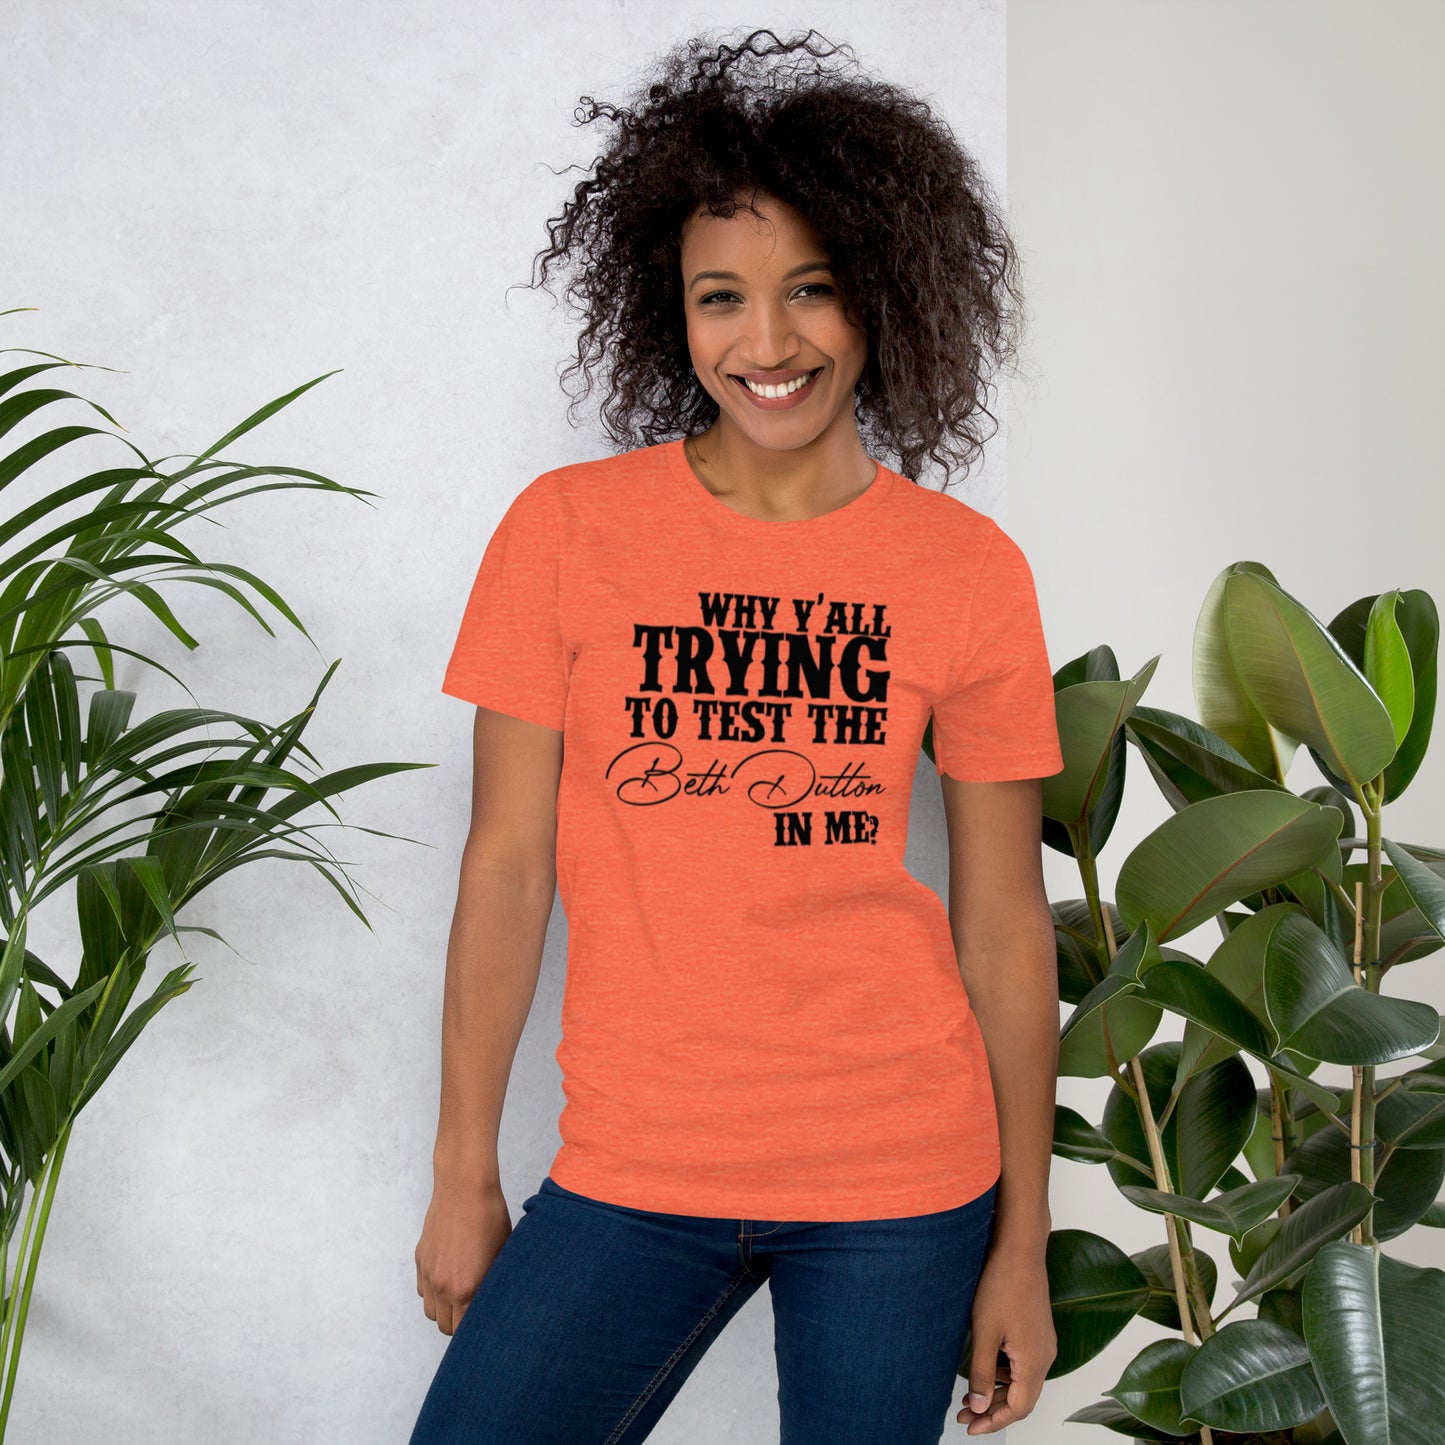 Why Y'all Trying - Get Your Twang On with Classic Country Tees - The Ultimate Unisex T-Shirt for True Country Souls! - Classic Country Tees